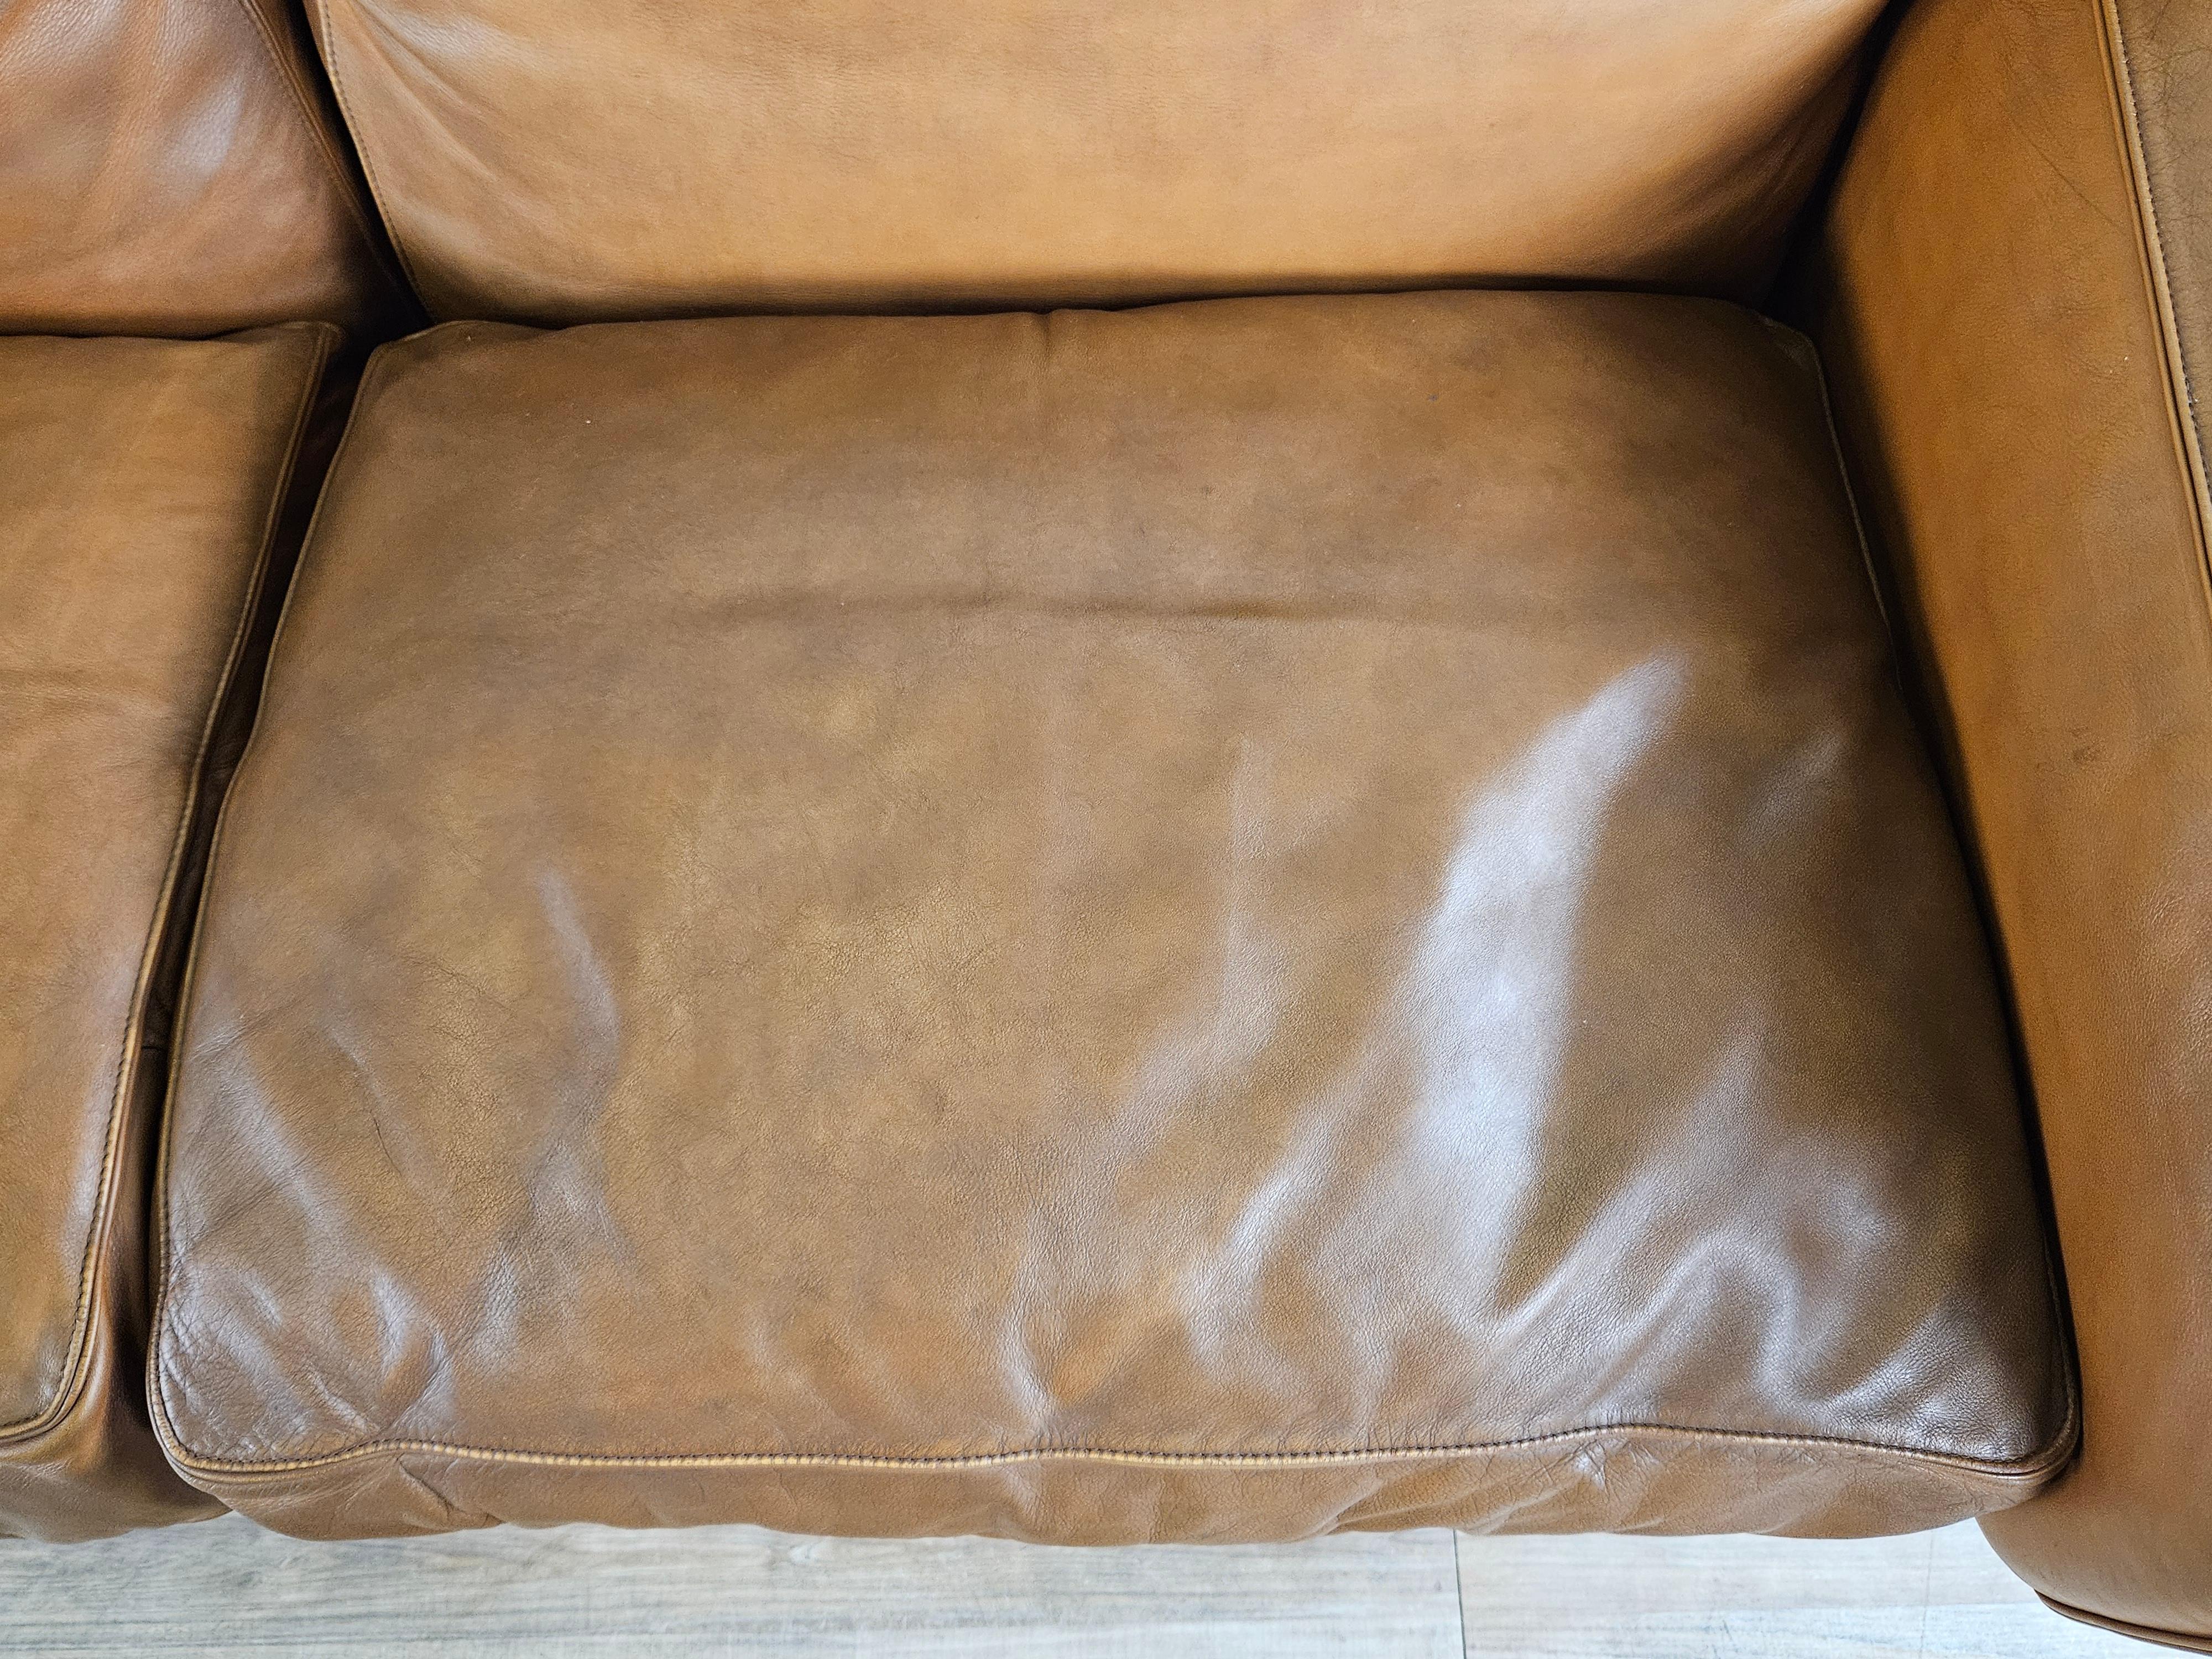 Poltrona Frau three-seater 1970s sofa in cognac-colored leather For Sale 1